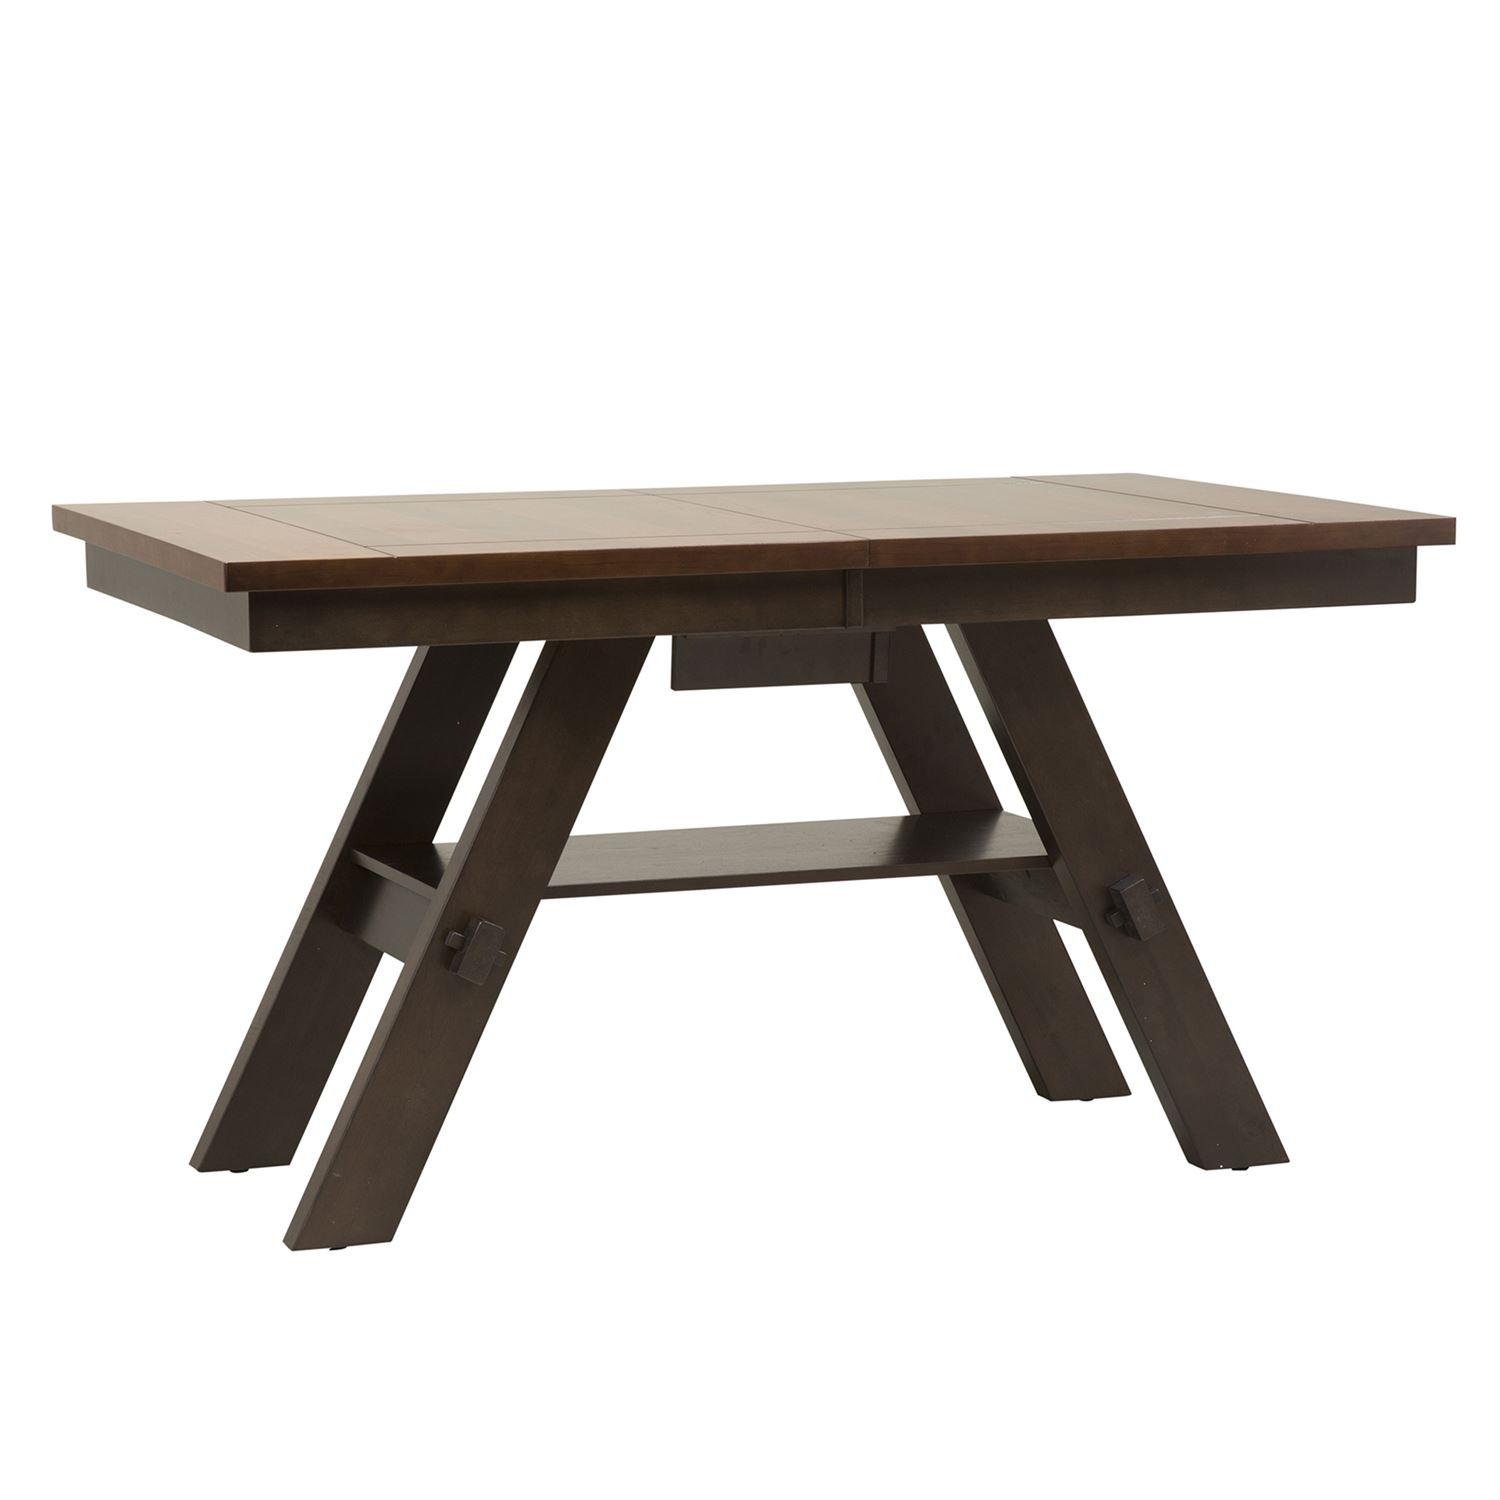   Lawson  (116-CD) Dining Table  